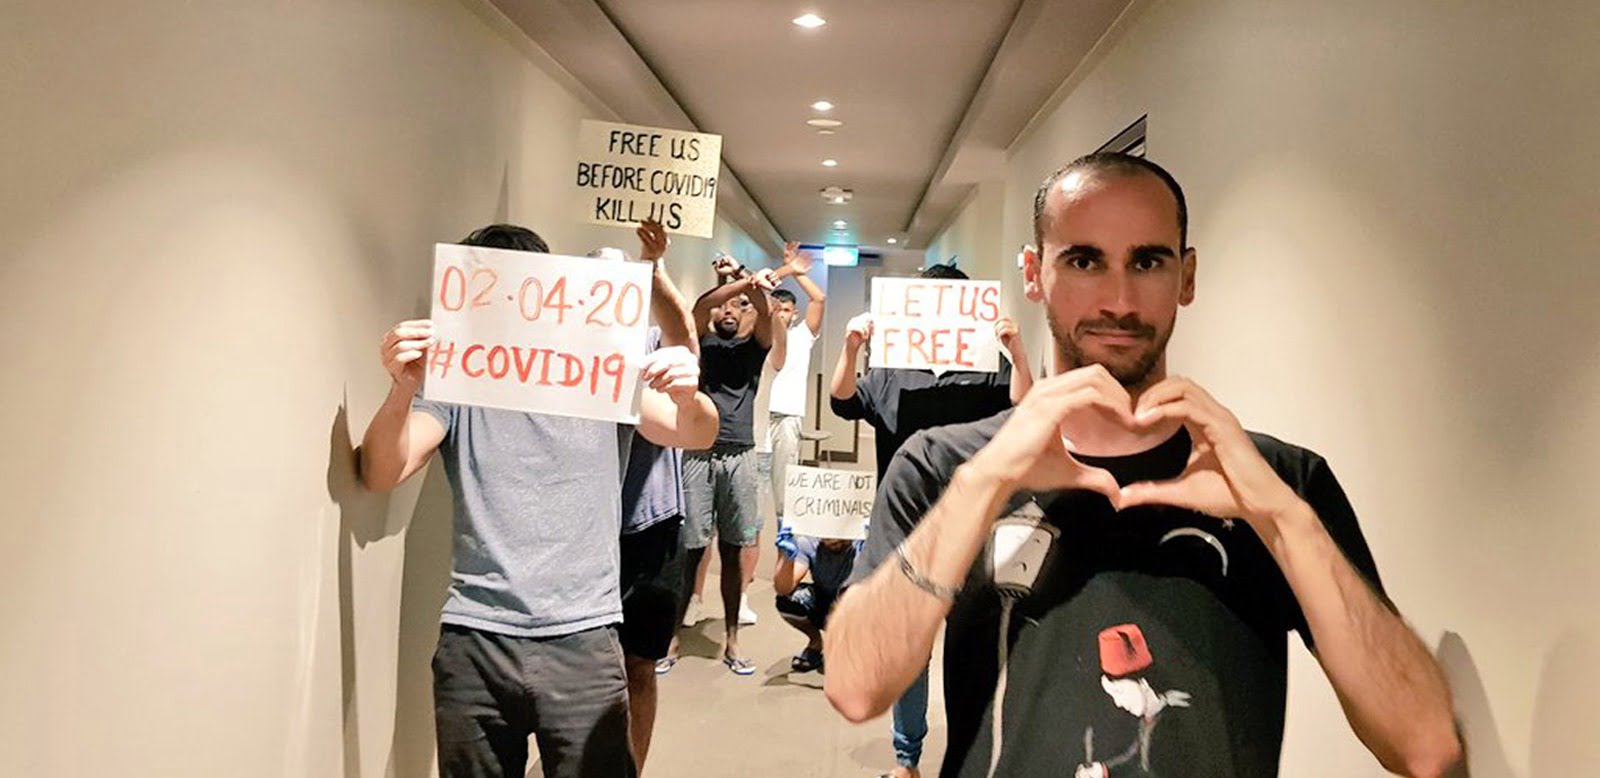 A small group of men stand in a hotel hallway, holding handmade signs asking 'Free us before COVID19 kills us'. One man creates heart symbol with his hands.